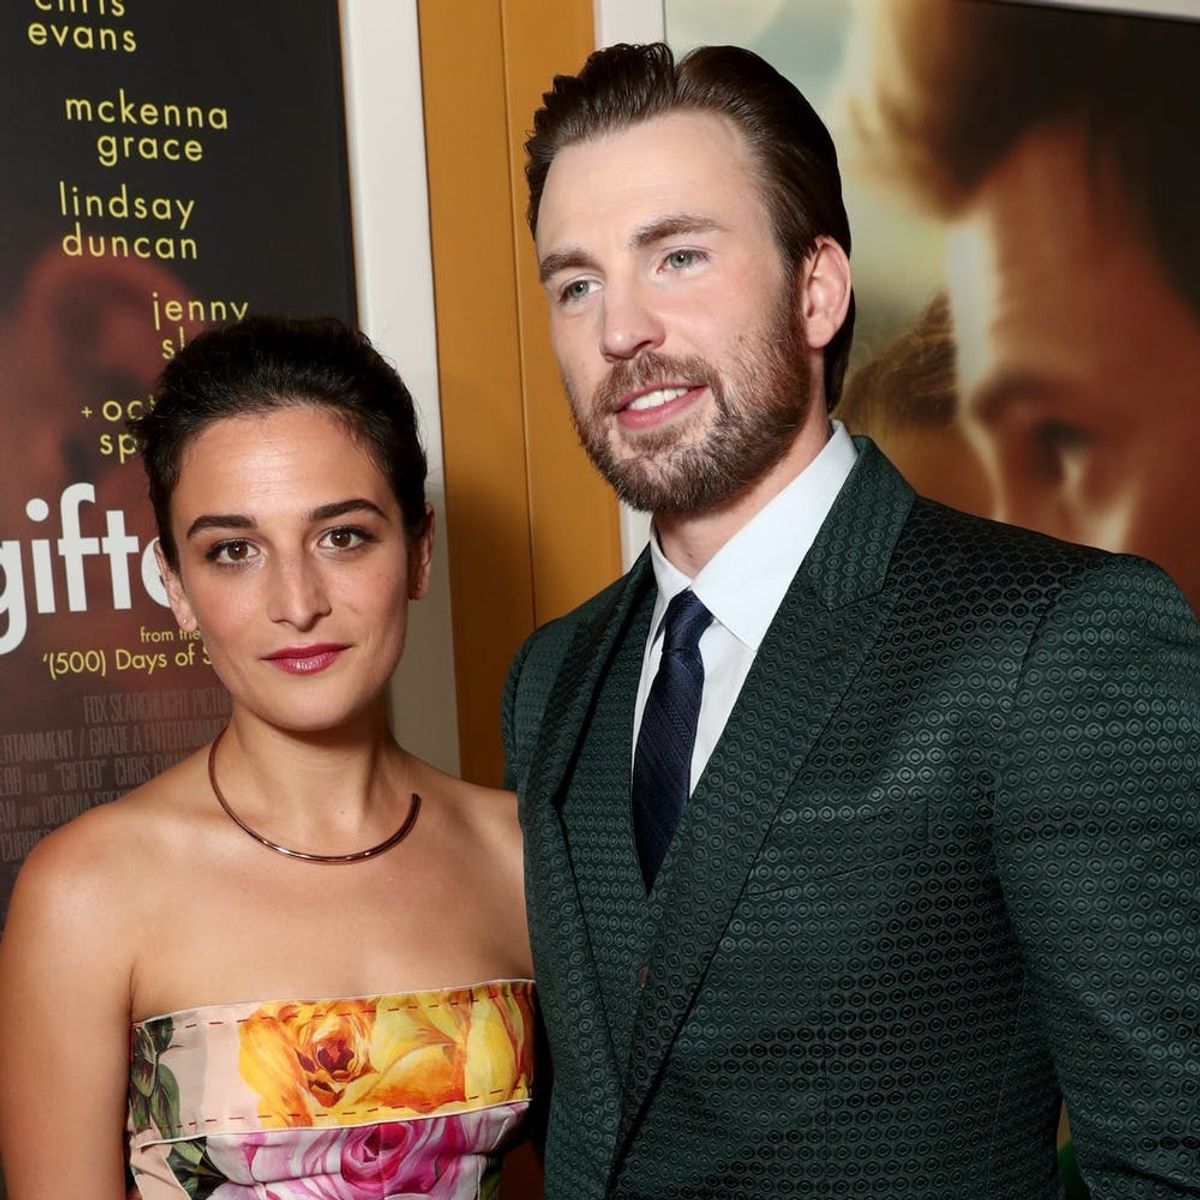 Chris Evans and Jenny Slate Are Sparking Major Reconciliation Rumors on Social Media